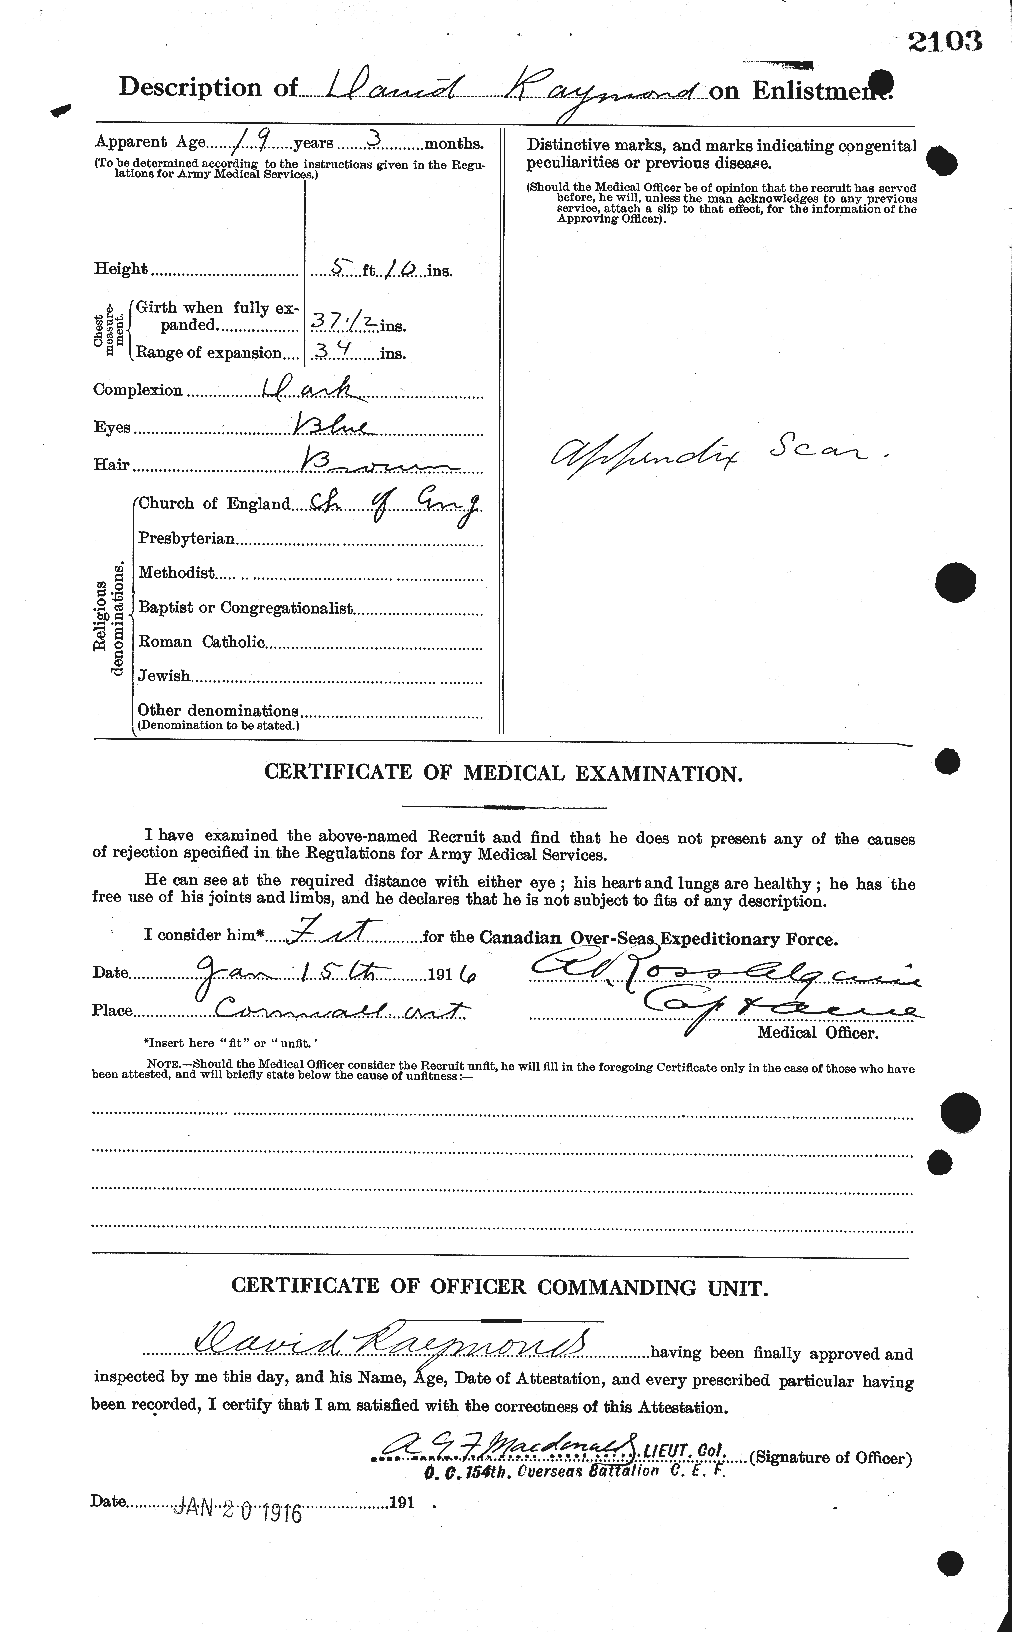 Personnel Records of the First World War - CEF 595290b